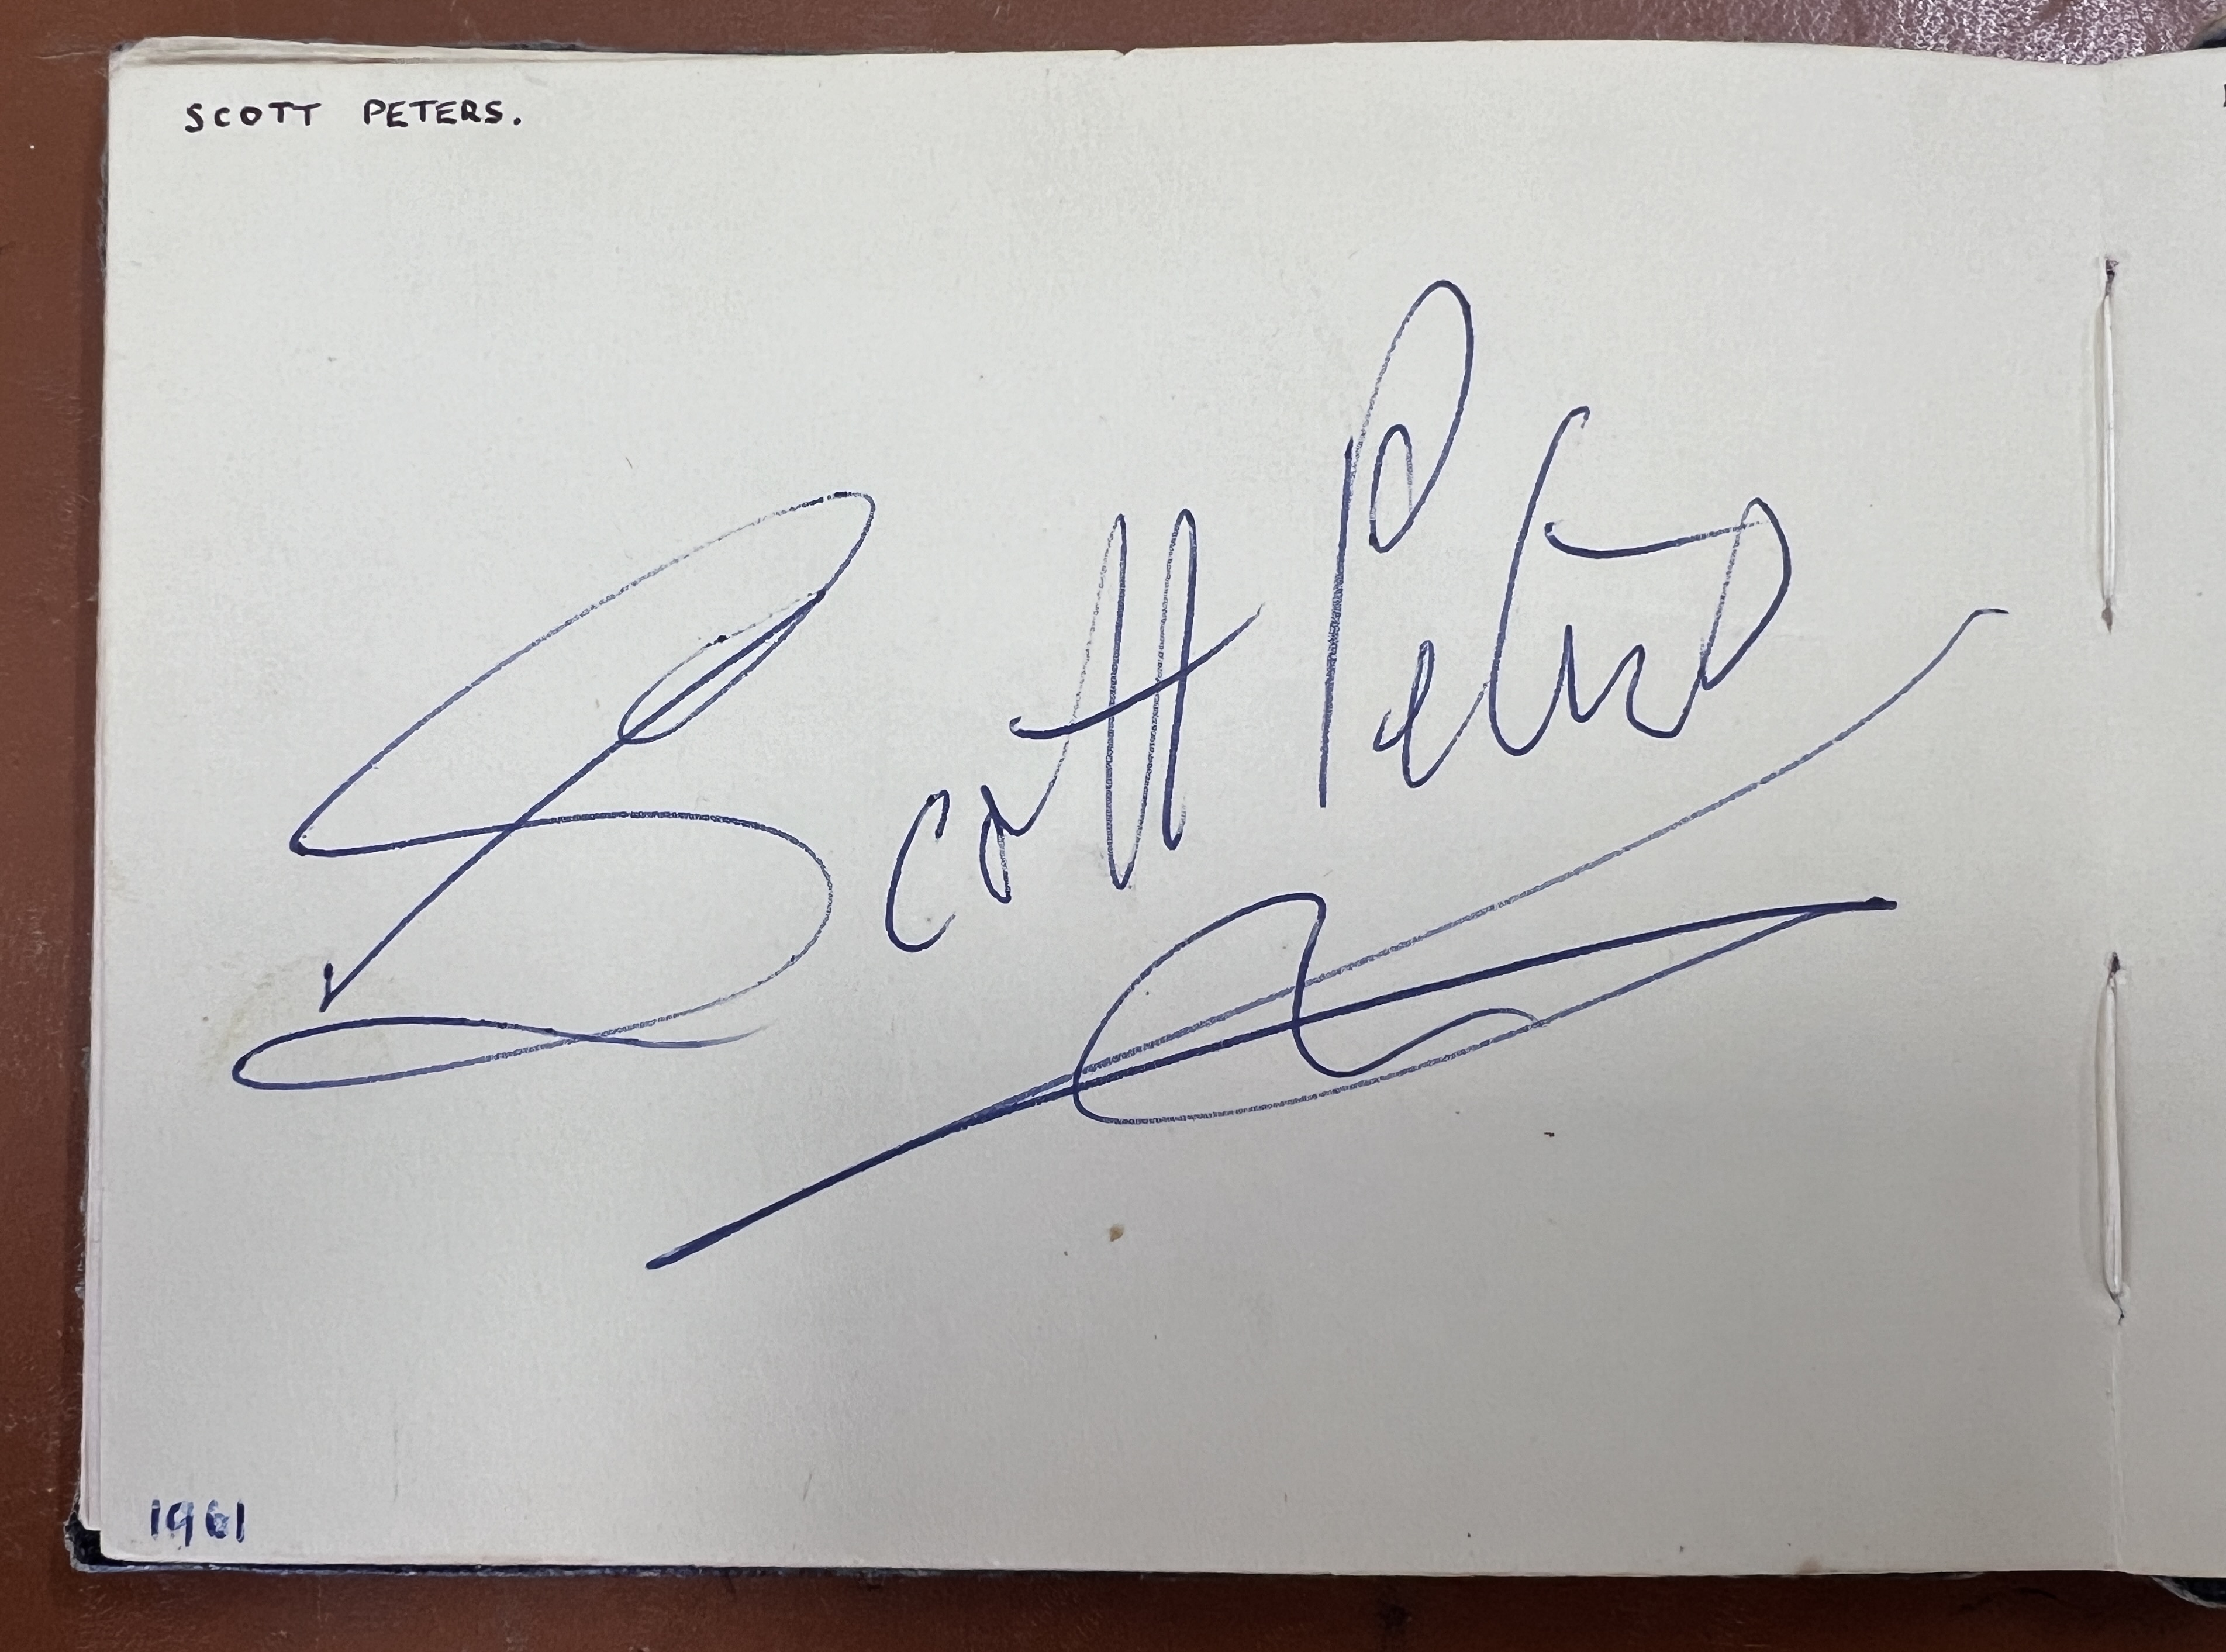 A 1960's autograph album containing autographs of various celebrities including Cliff Richard, - Image 11 of 37